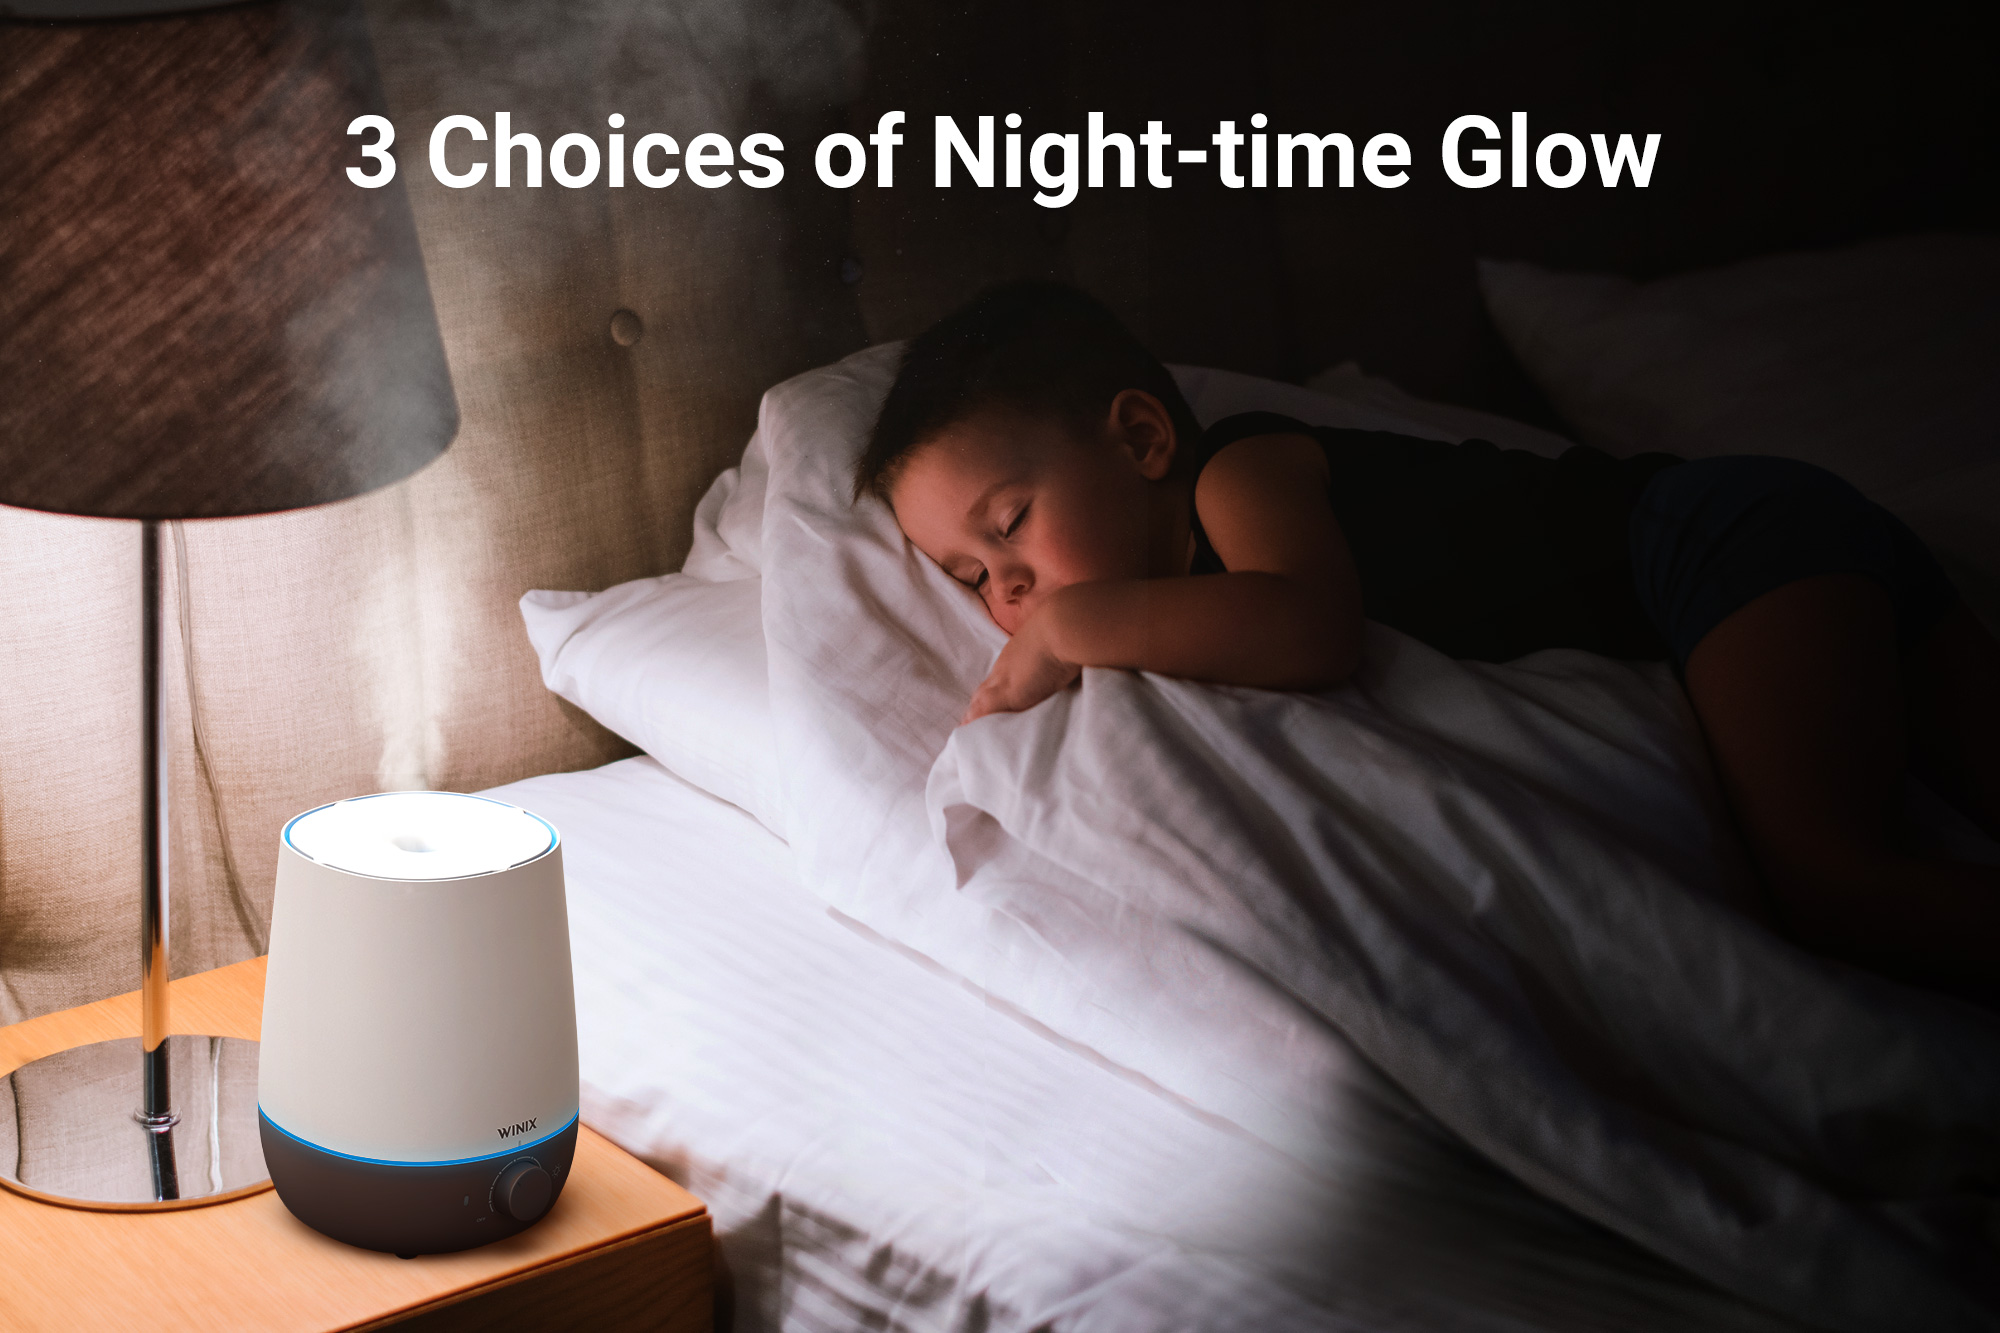 L61 Humidifier on nightstand next to sleeping child and text saying 3 choices of night-time glow